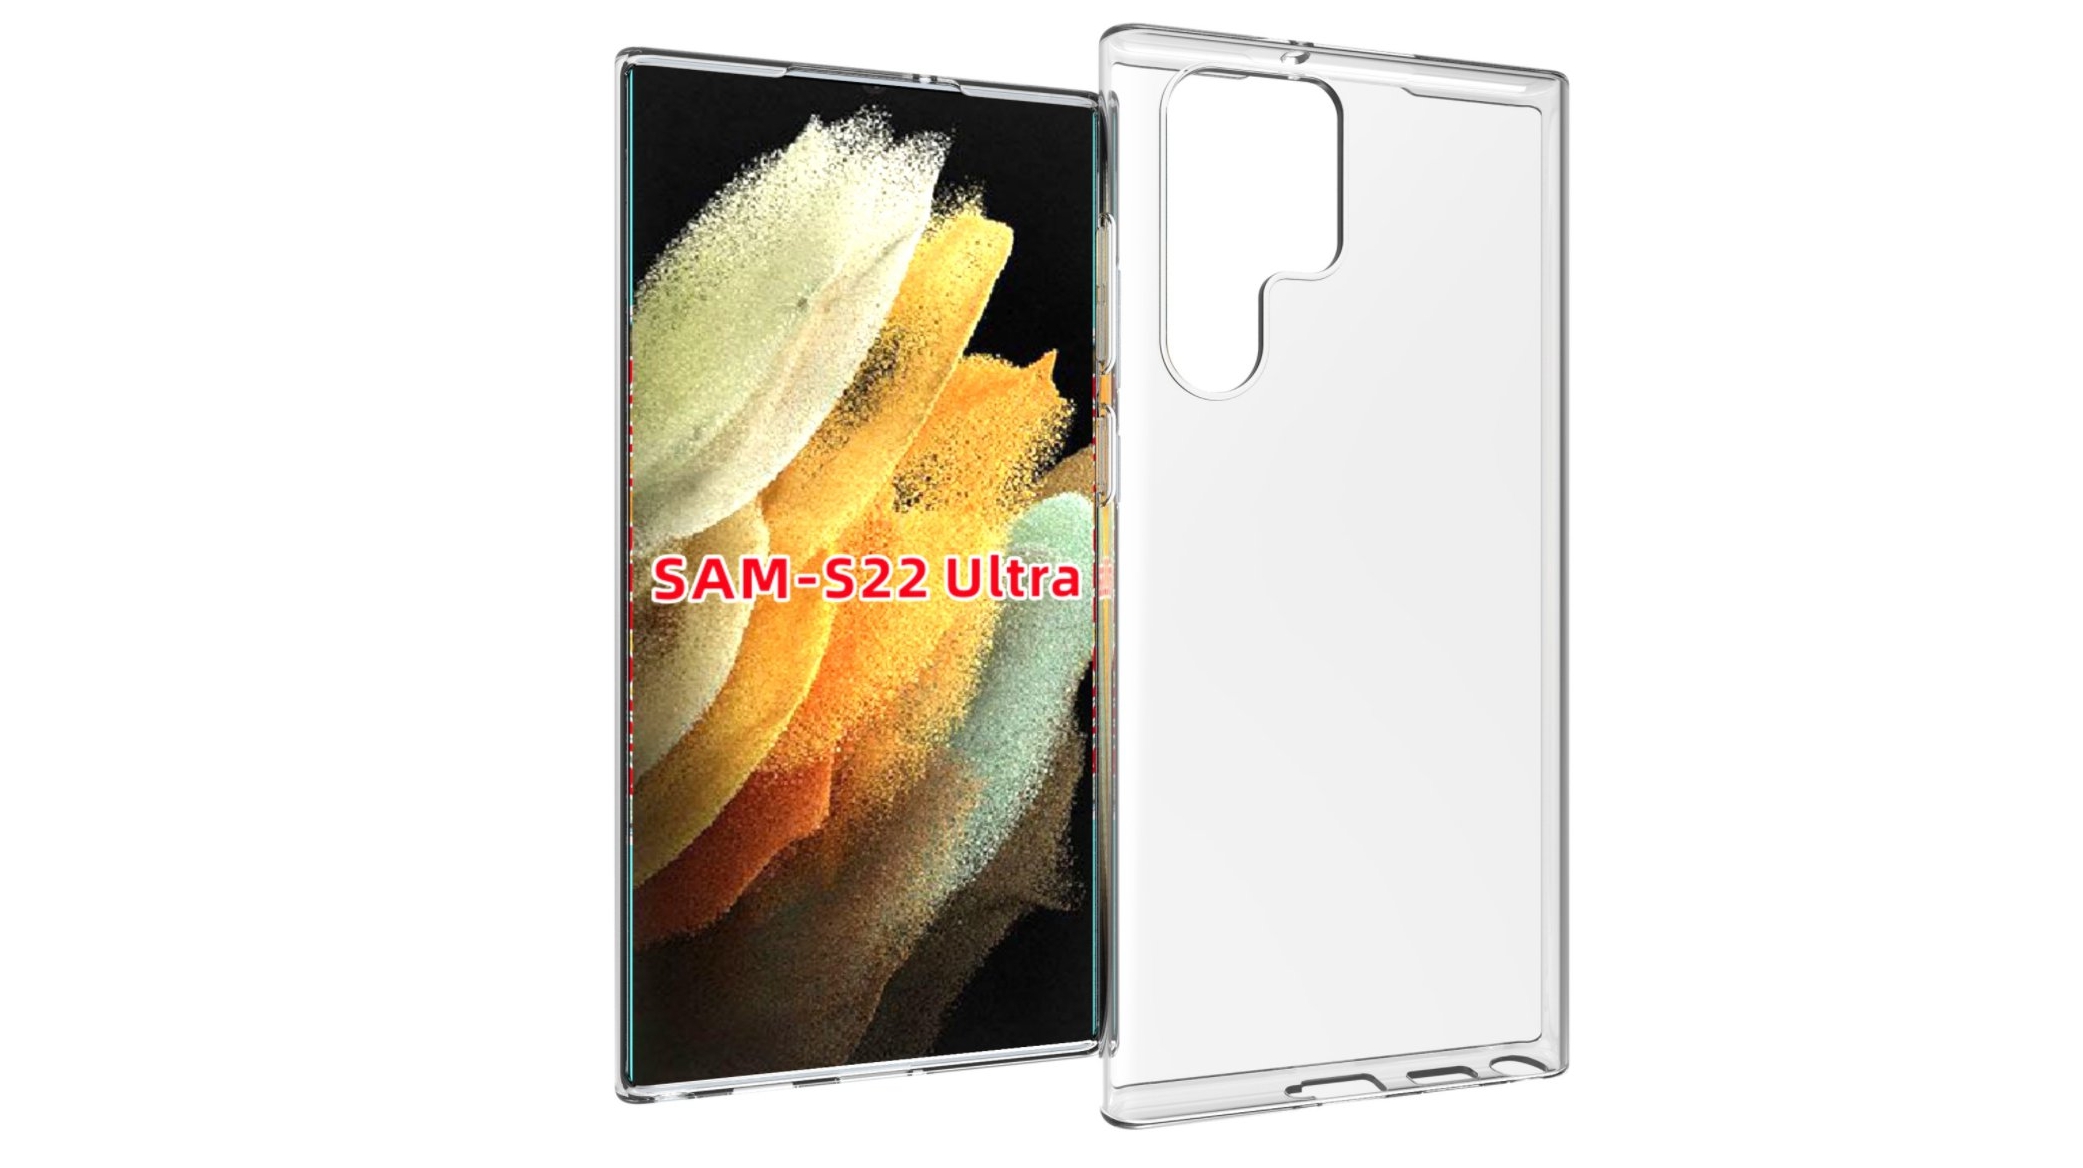 A render of a case seemingly designed for the Samsung Galaxy S22 Ultra